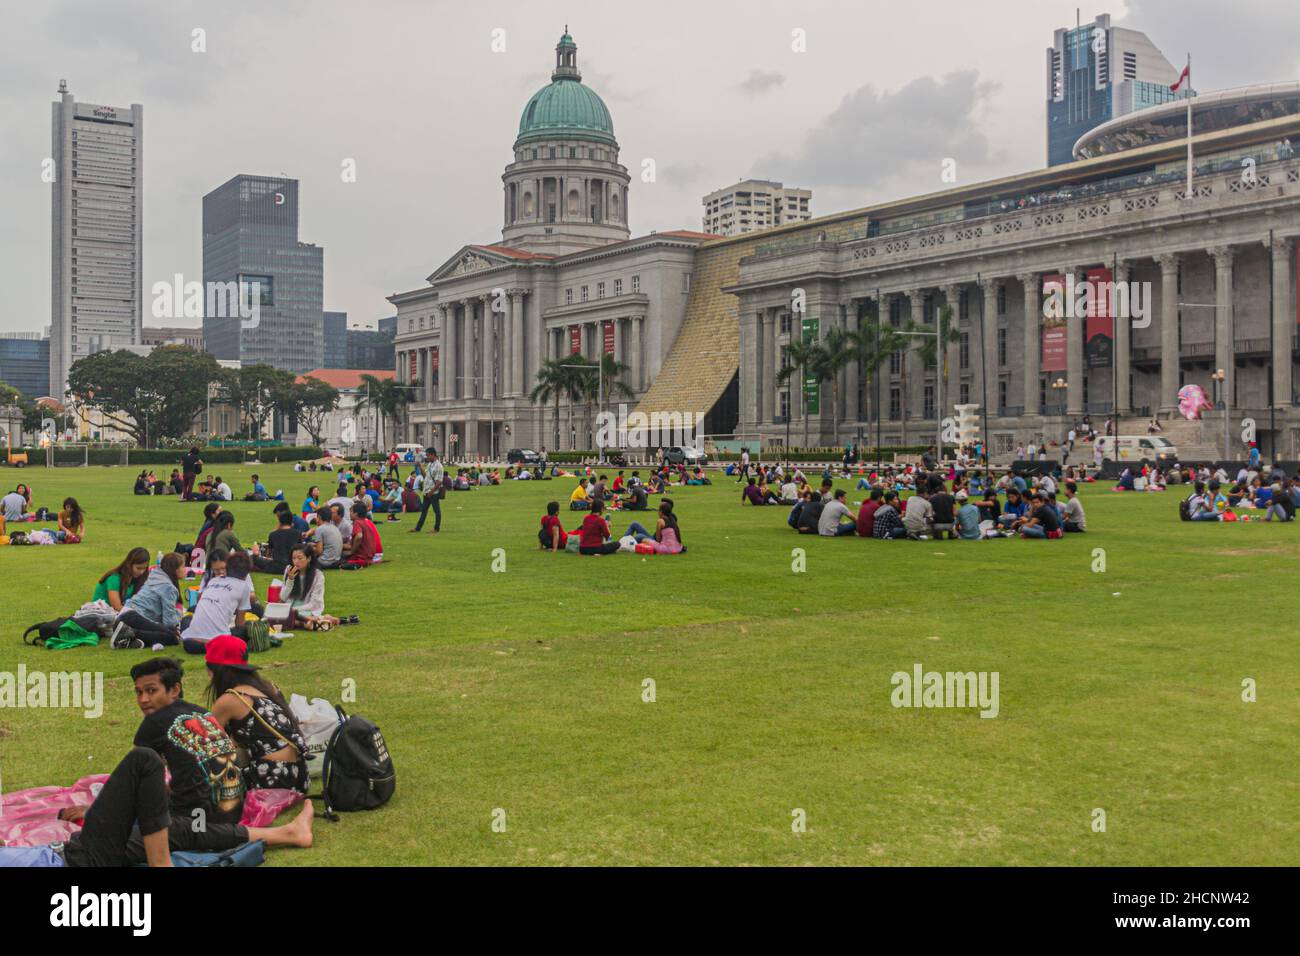 SINGAPORE, SINGAPORE - MARCH 11, 2018: People sit at the Padang ,open playing field in Singapore Stock Photo